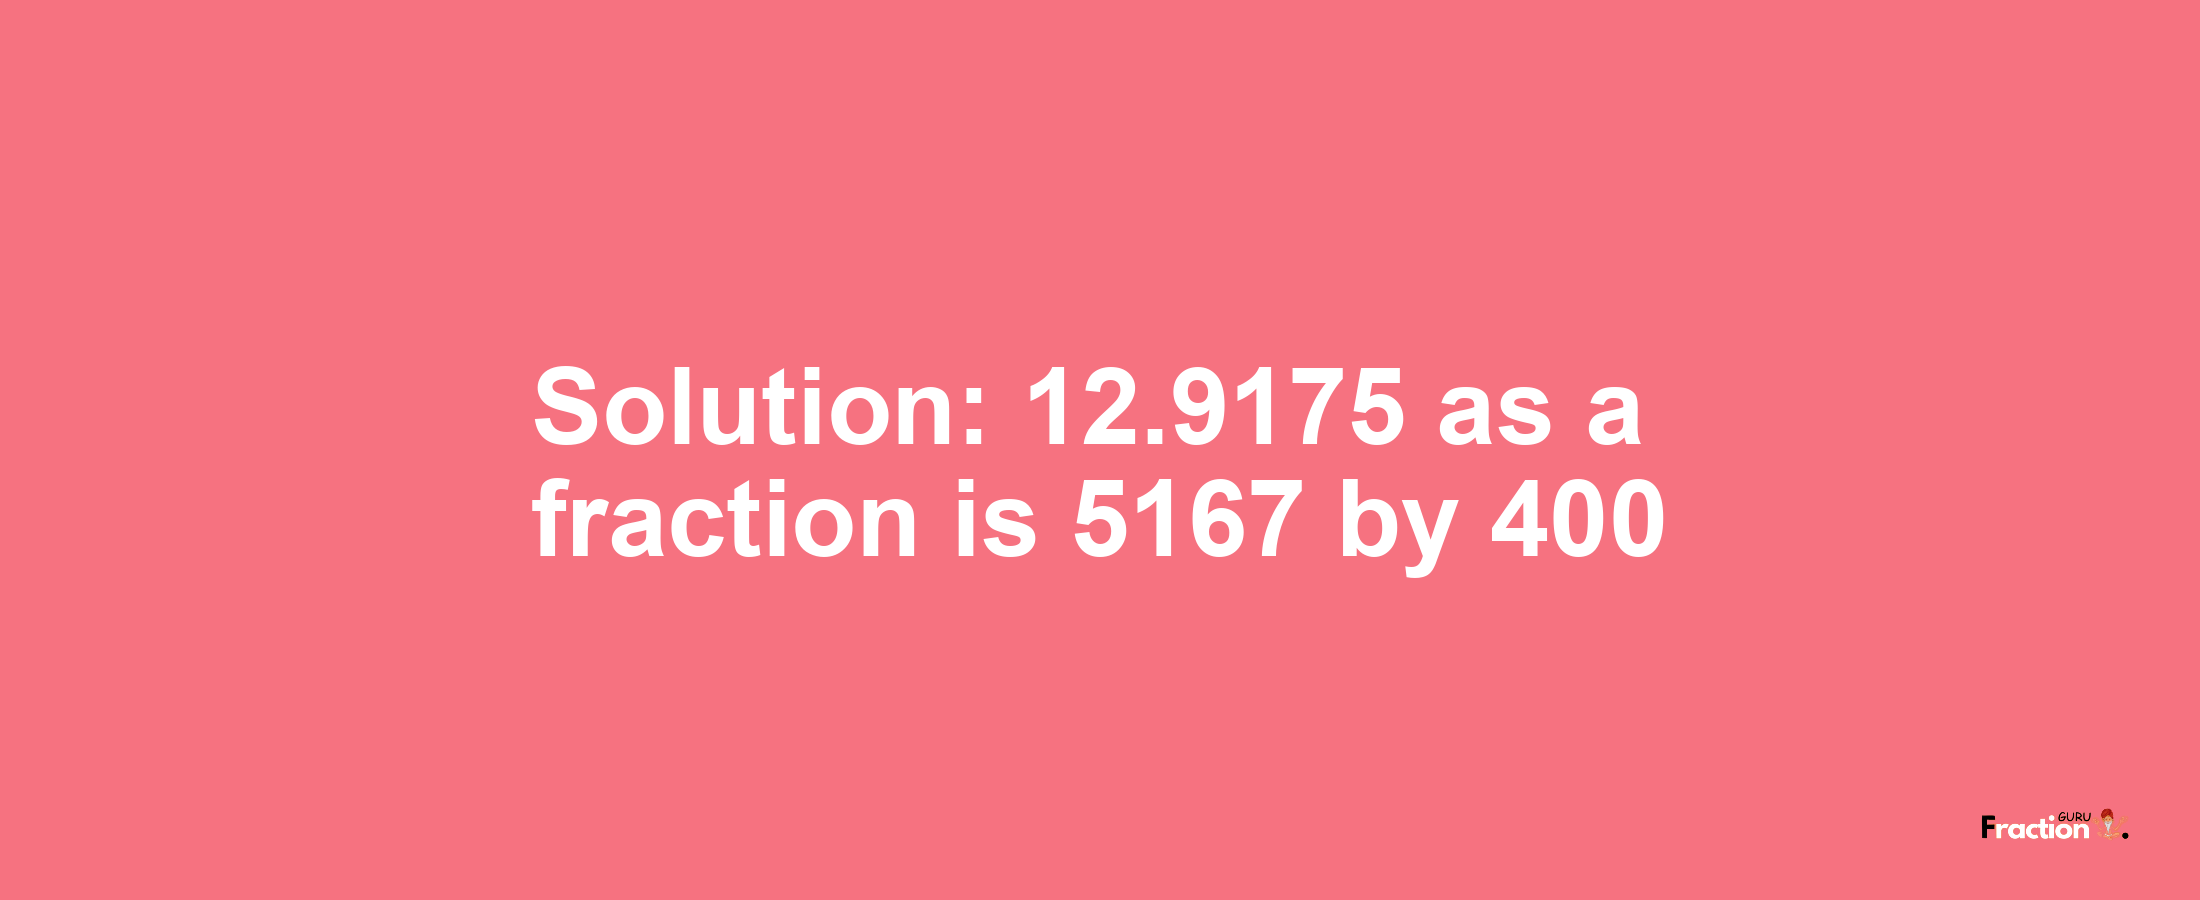 Solution:12.9175 as a fraction is 5167/400